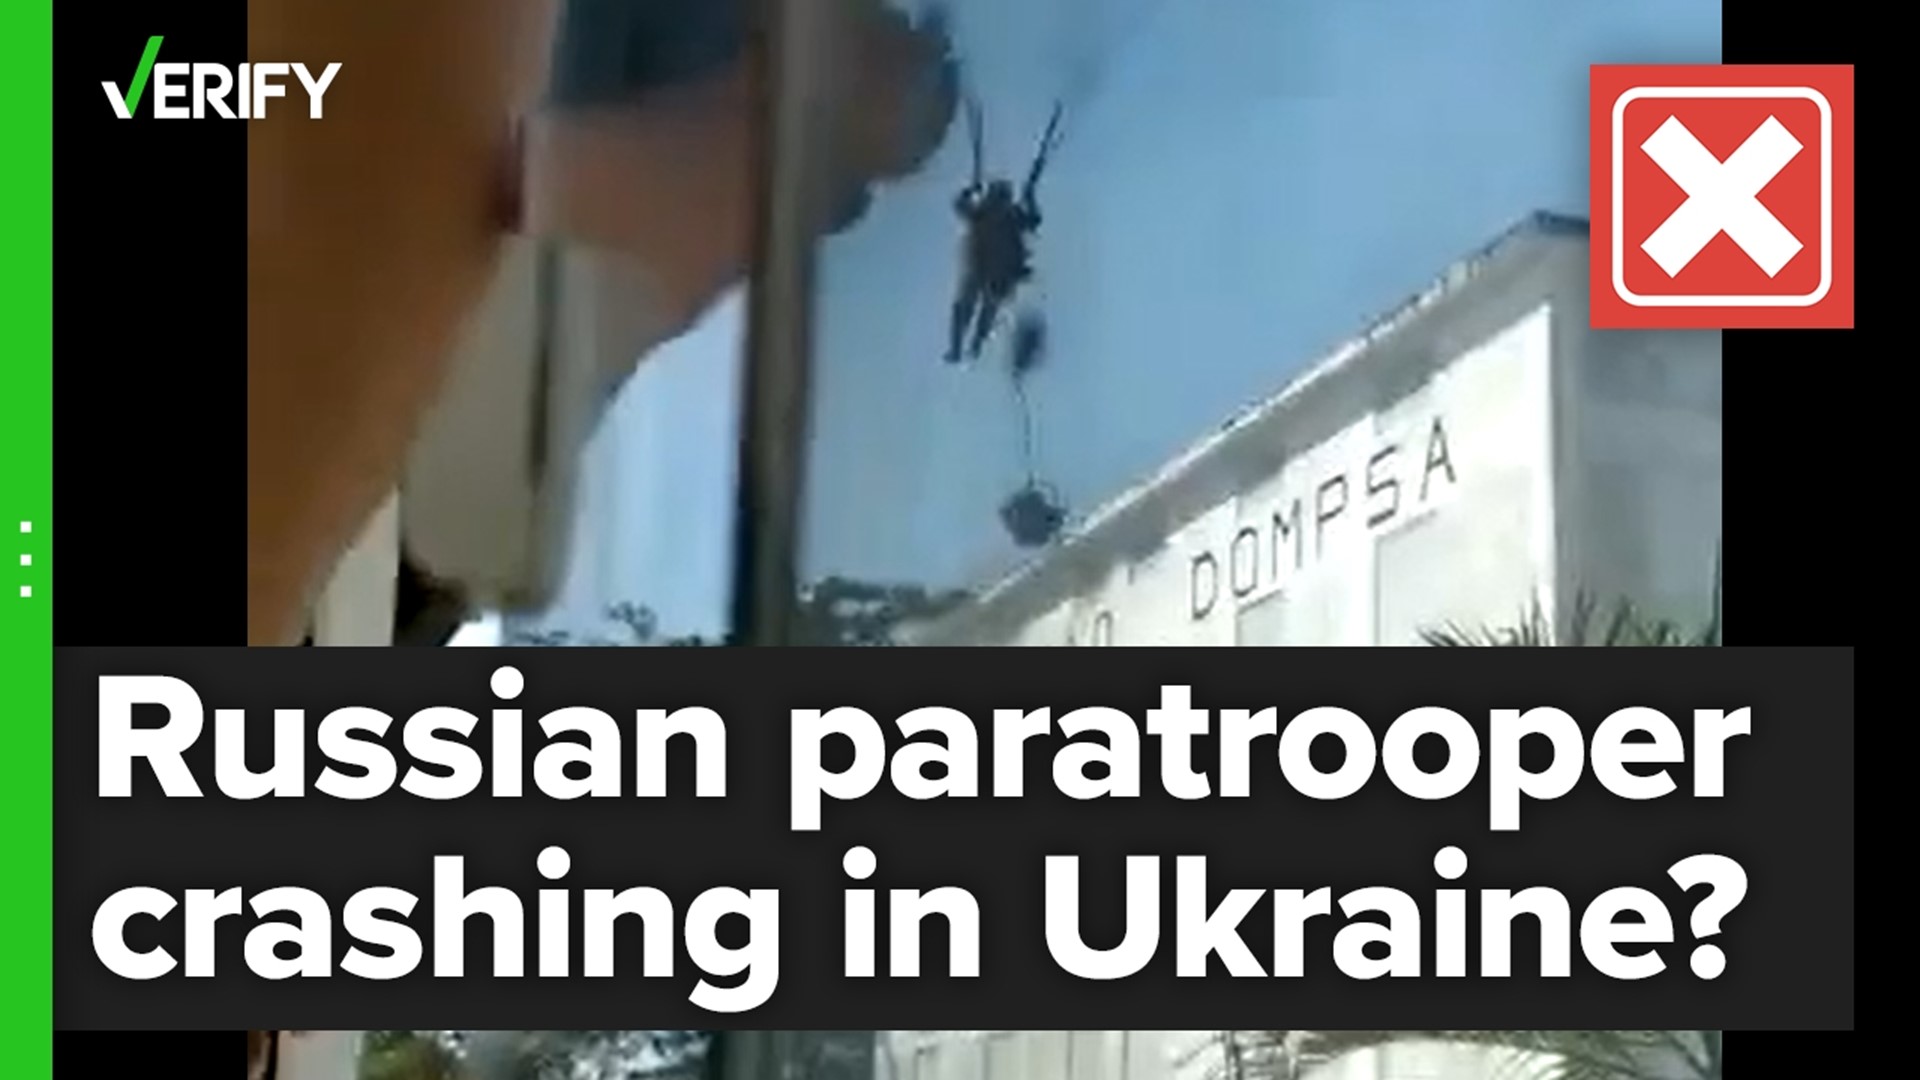 Does this video show a Russian pilot landing in Ukrainian territory? The VERIFY team confirms this is false.